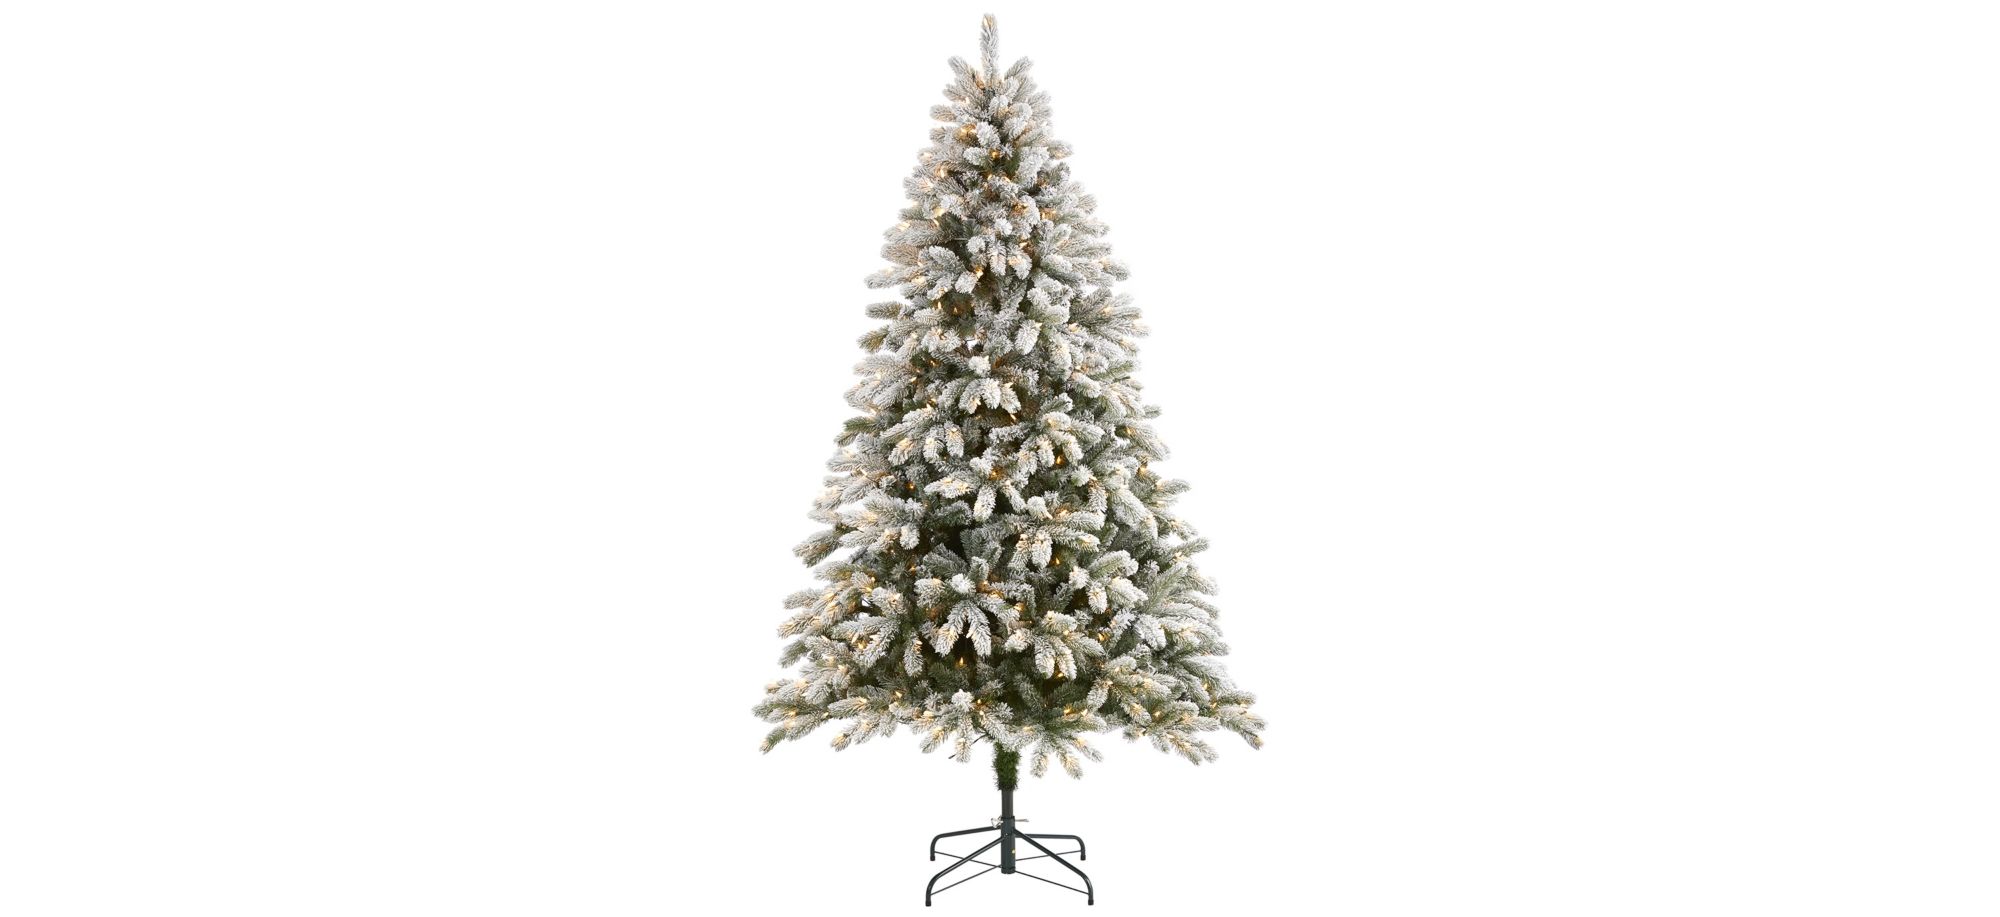 7.5ft. Pre-Lit Flocked South Carolina Spruce Artificial Christmas Tree in Green by Bellanest